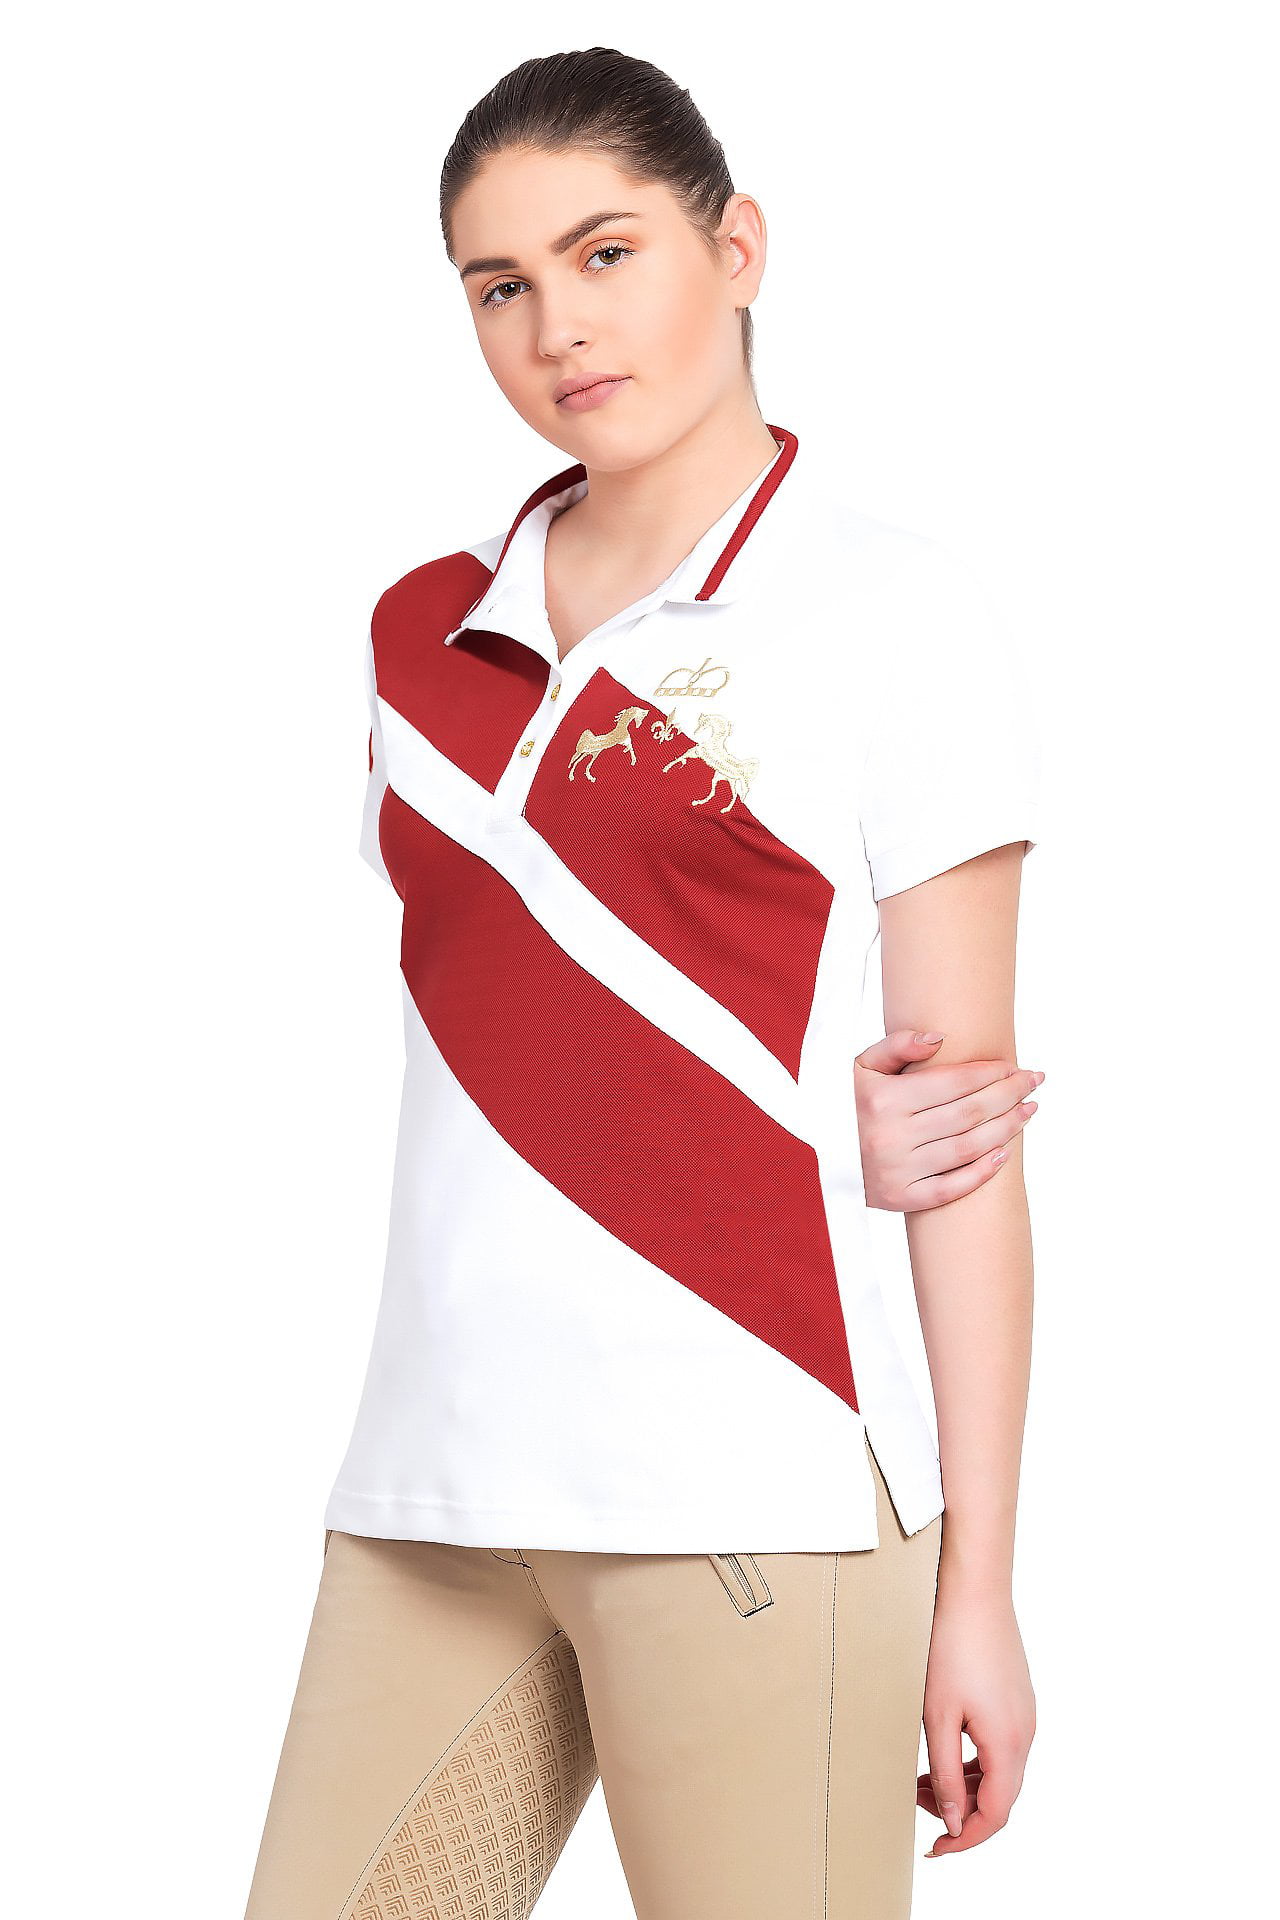 Equine Couture Womens X-Press Short Sleeve Polo